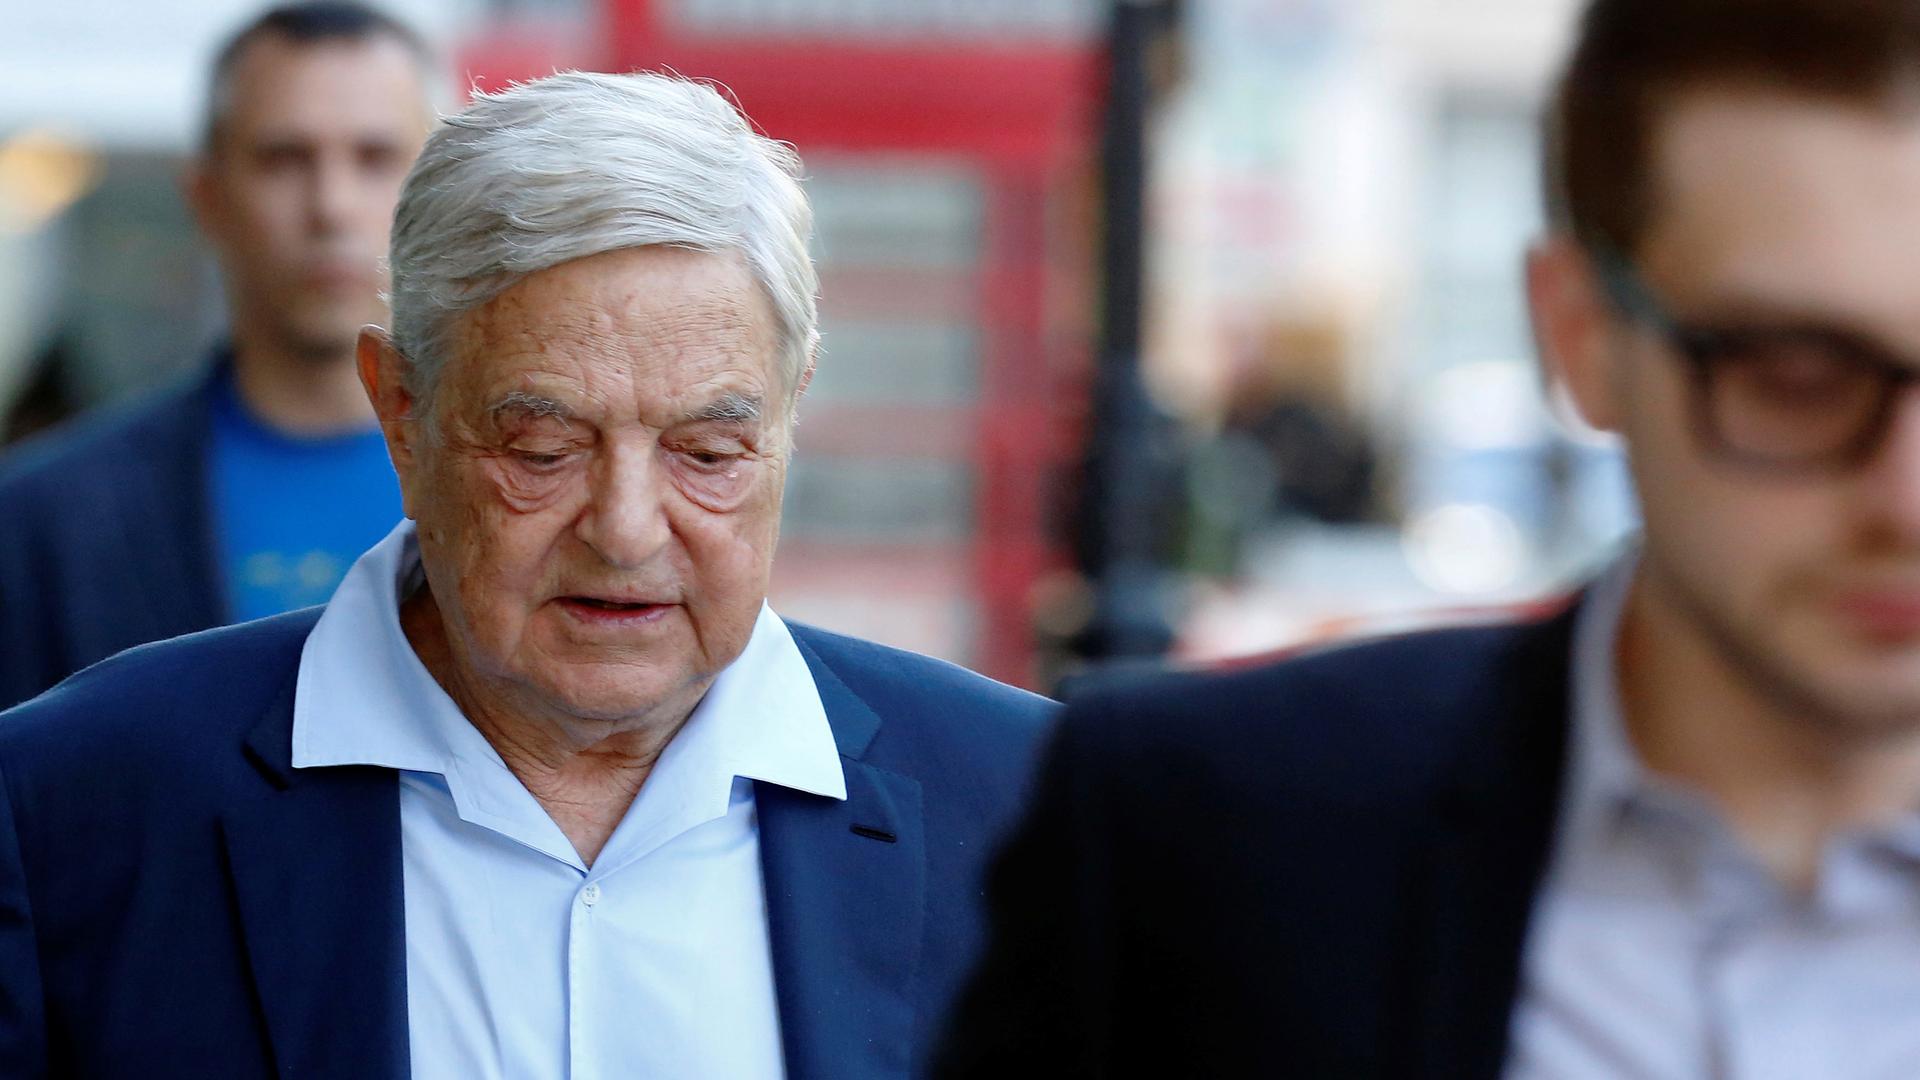 Business magnate George Soros arrives to speak at the Open Russia Club in London.